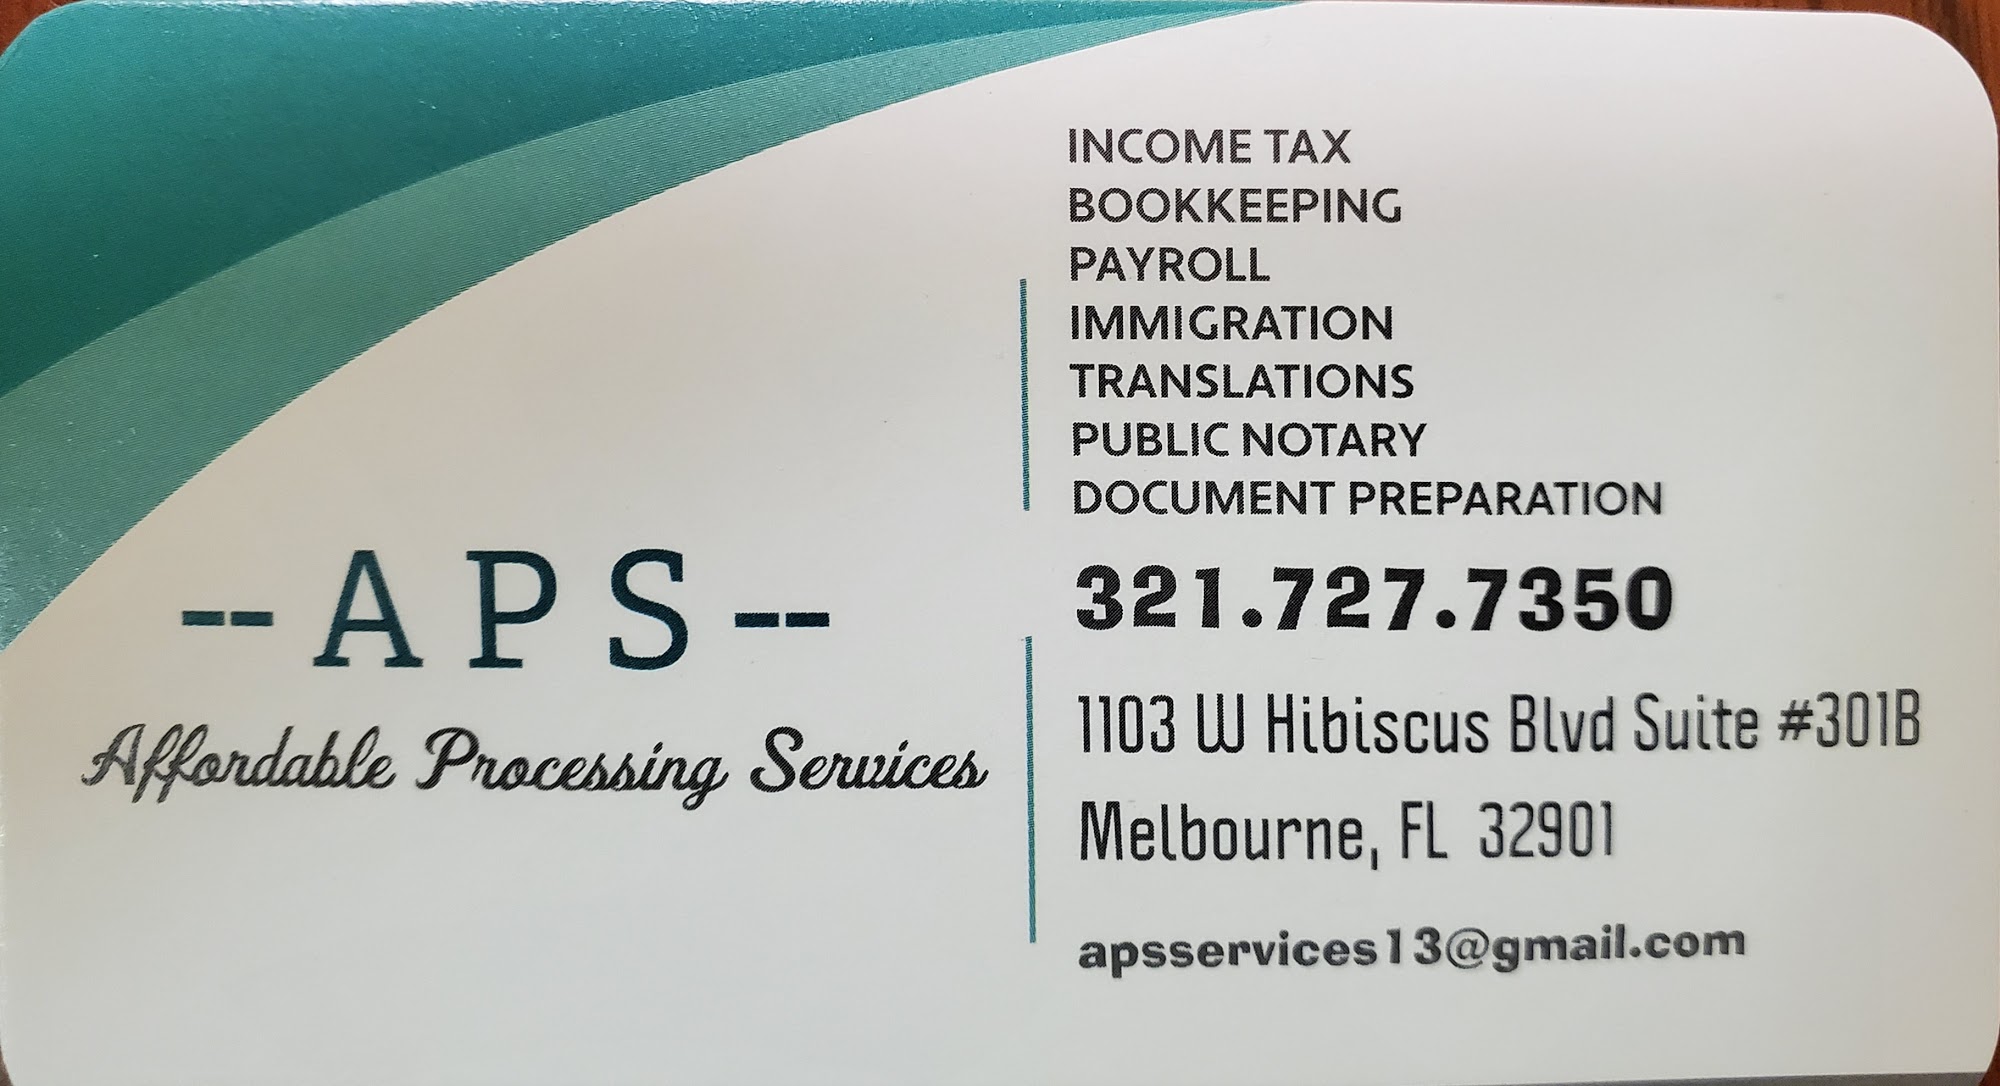 APS Affordable Processing Service